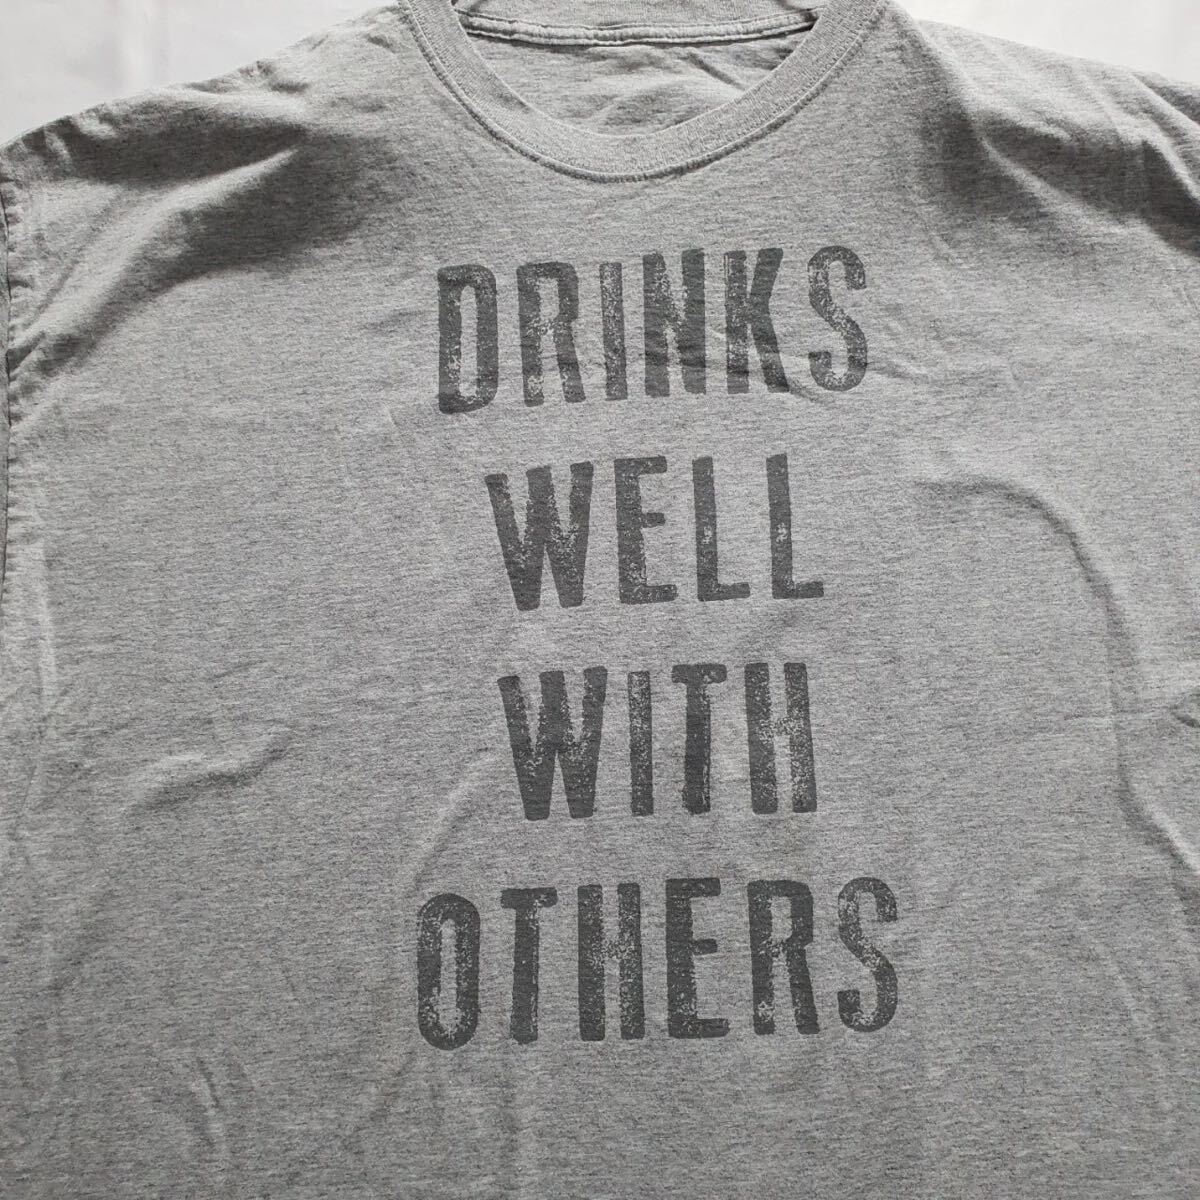 Drinks Well With Others メンズ 半袖 プリント ヴィンテージ Tシャツ 半袖Tシャツ ライトグレー 3XL 90's 古着 #MA0462_画像7